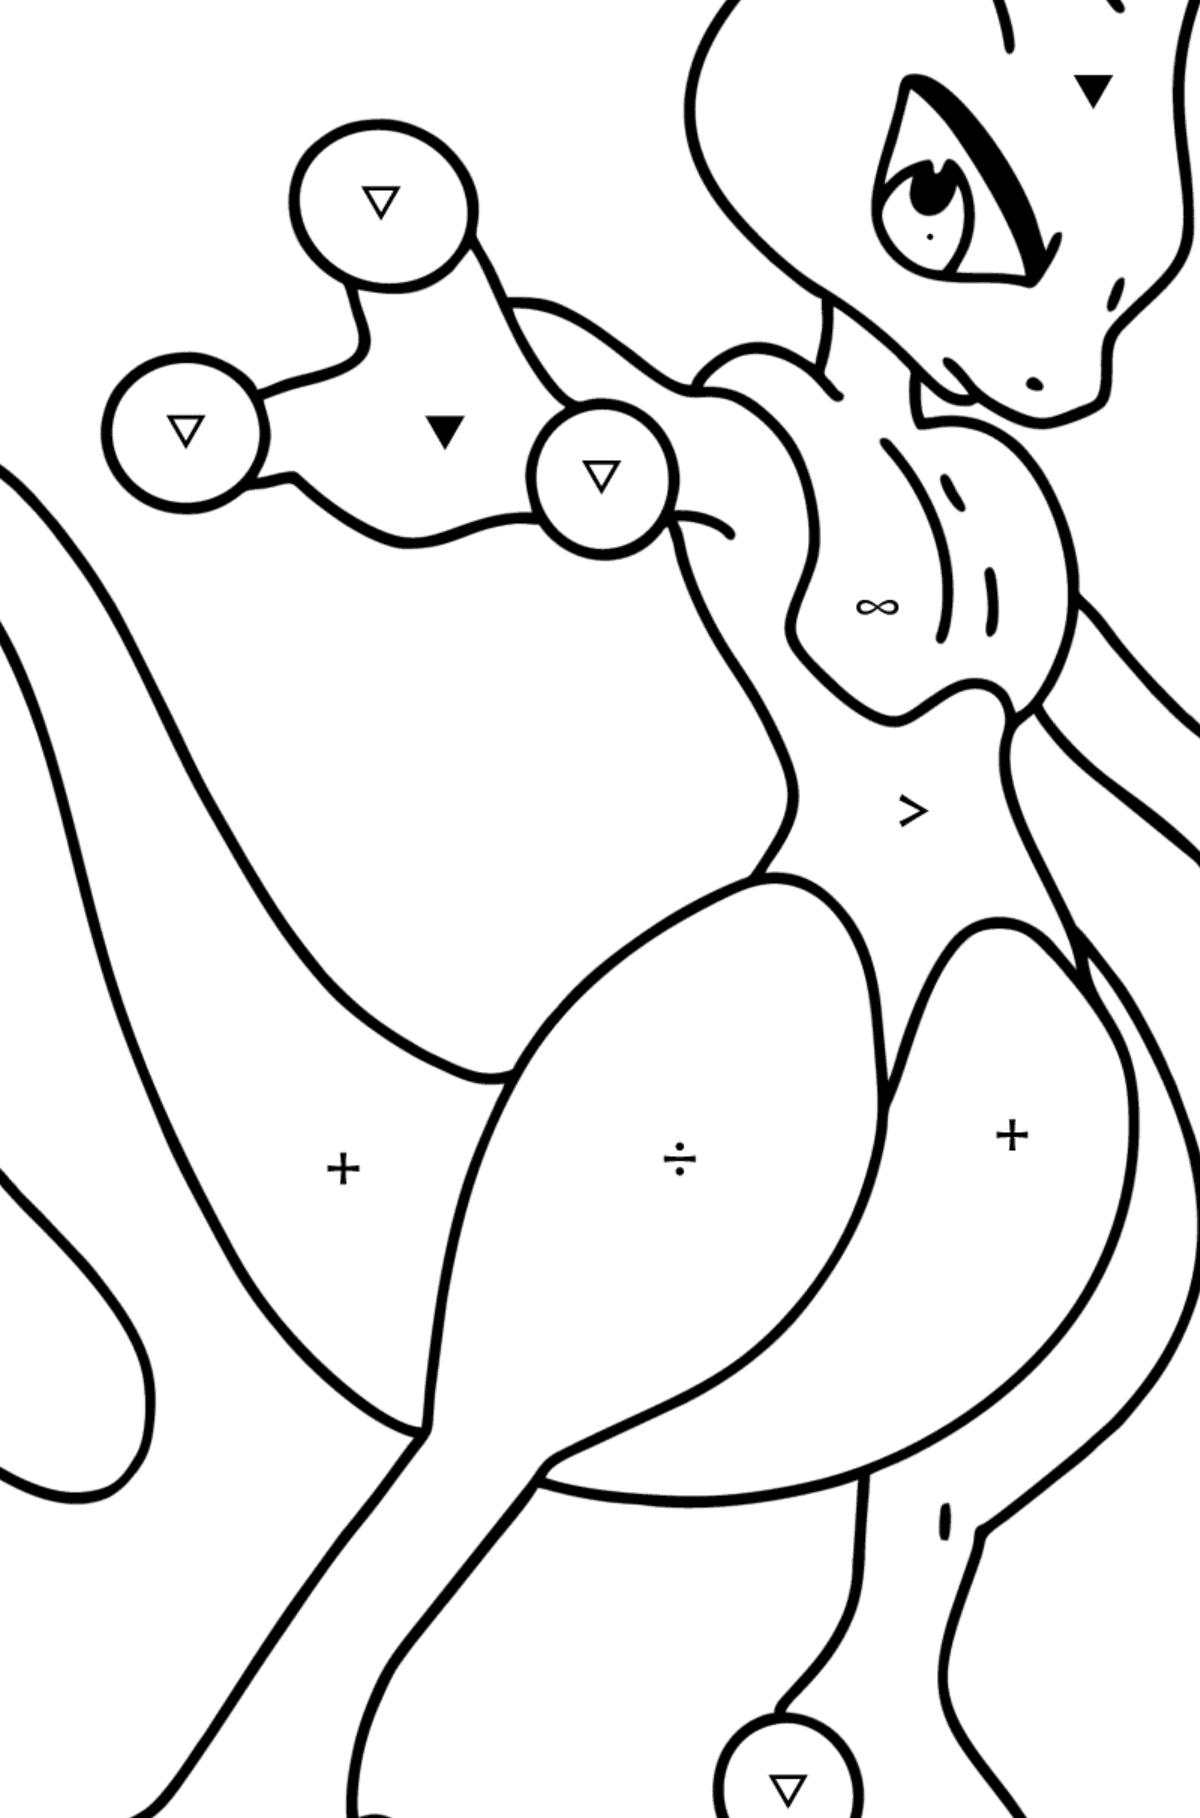 Coloring page Pokemon Go Mewtwo - Coloring by Symbols for Kids